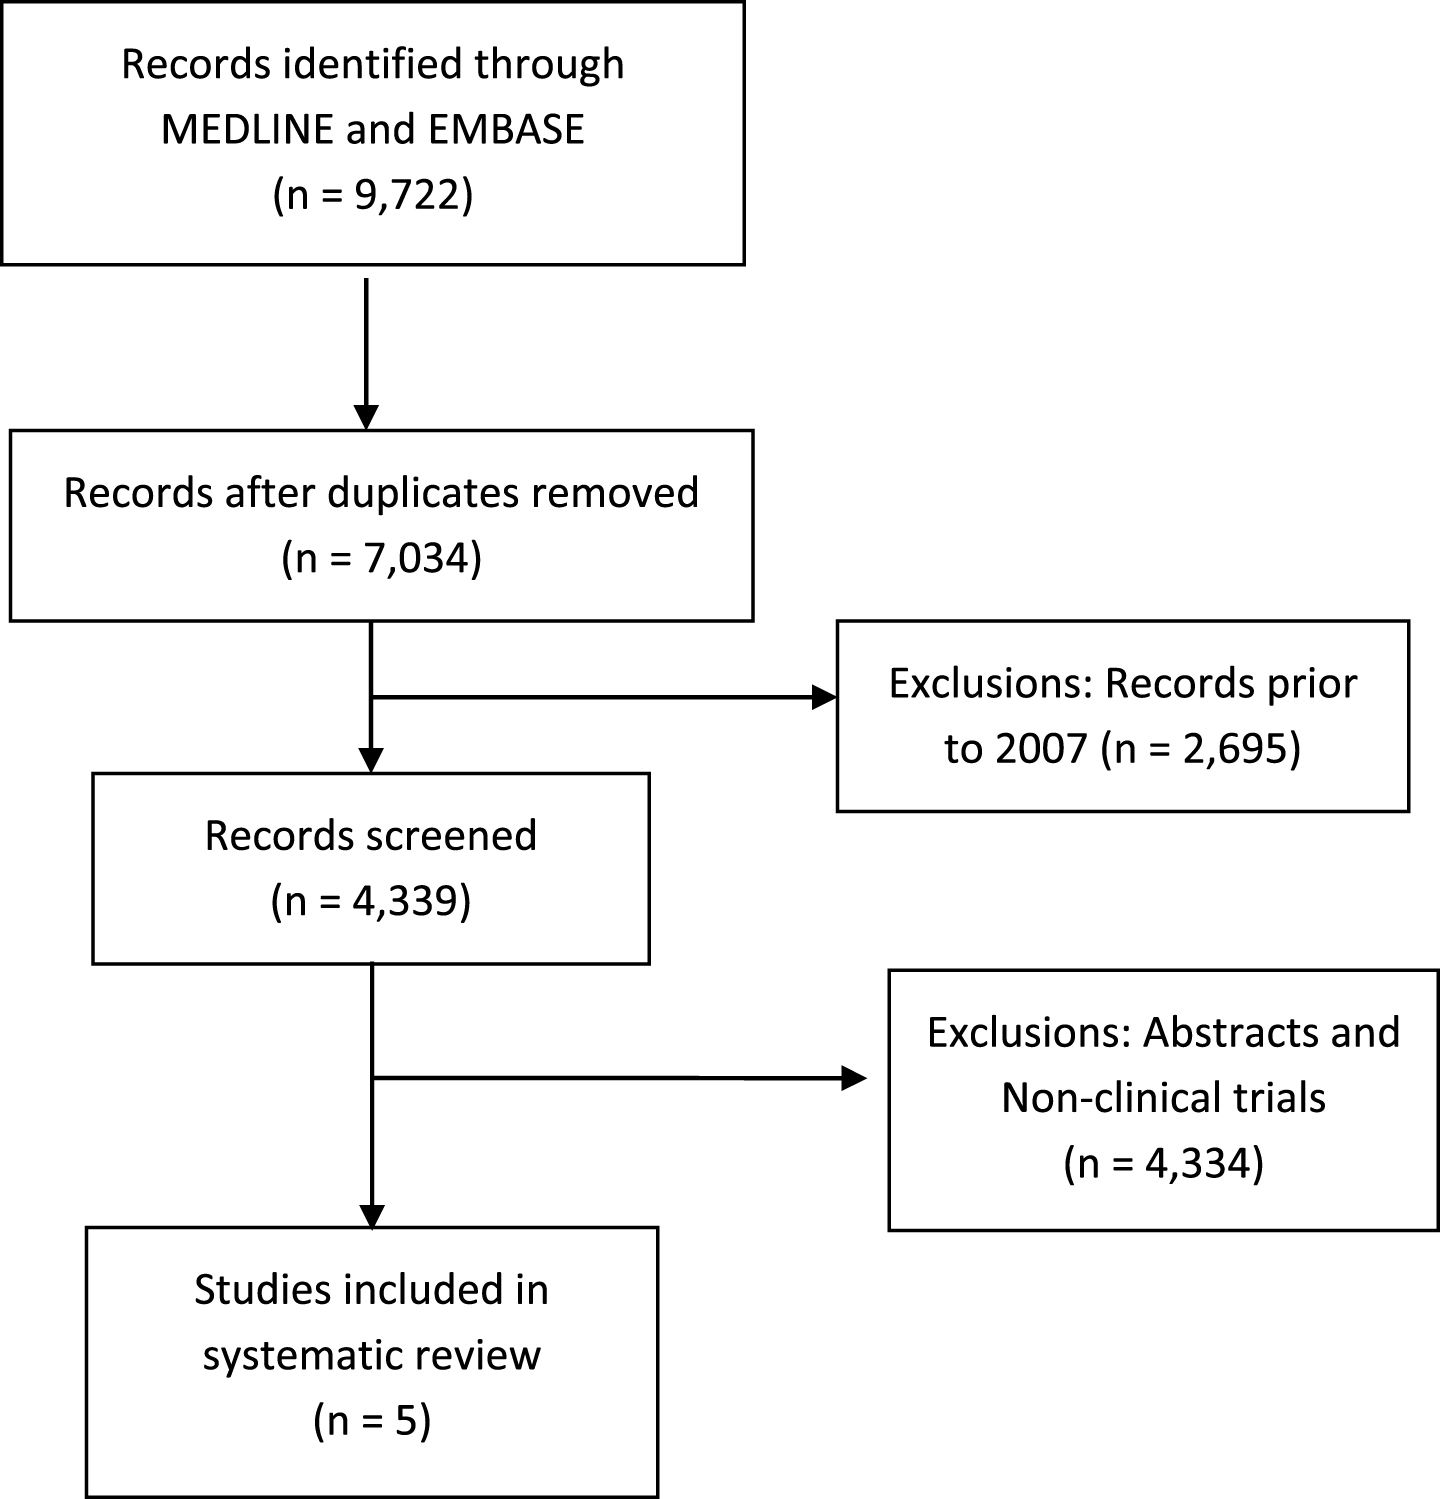 Consort flow diagram of systematic review.